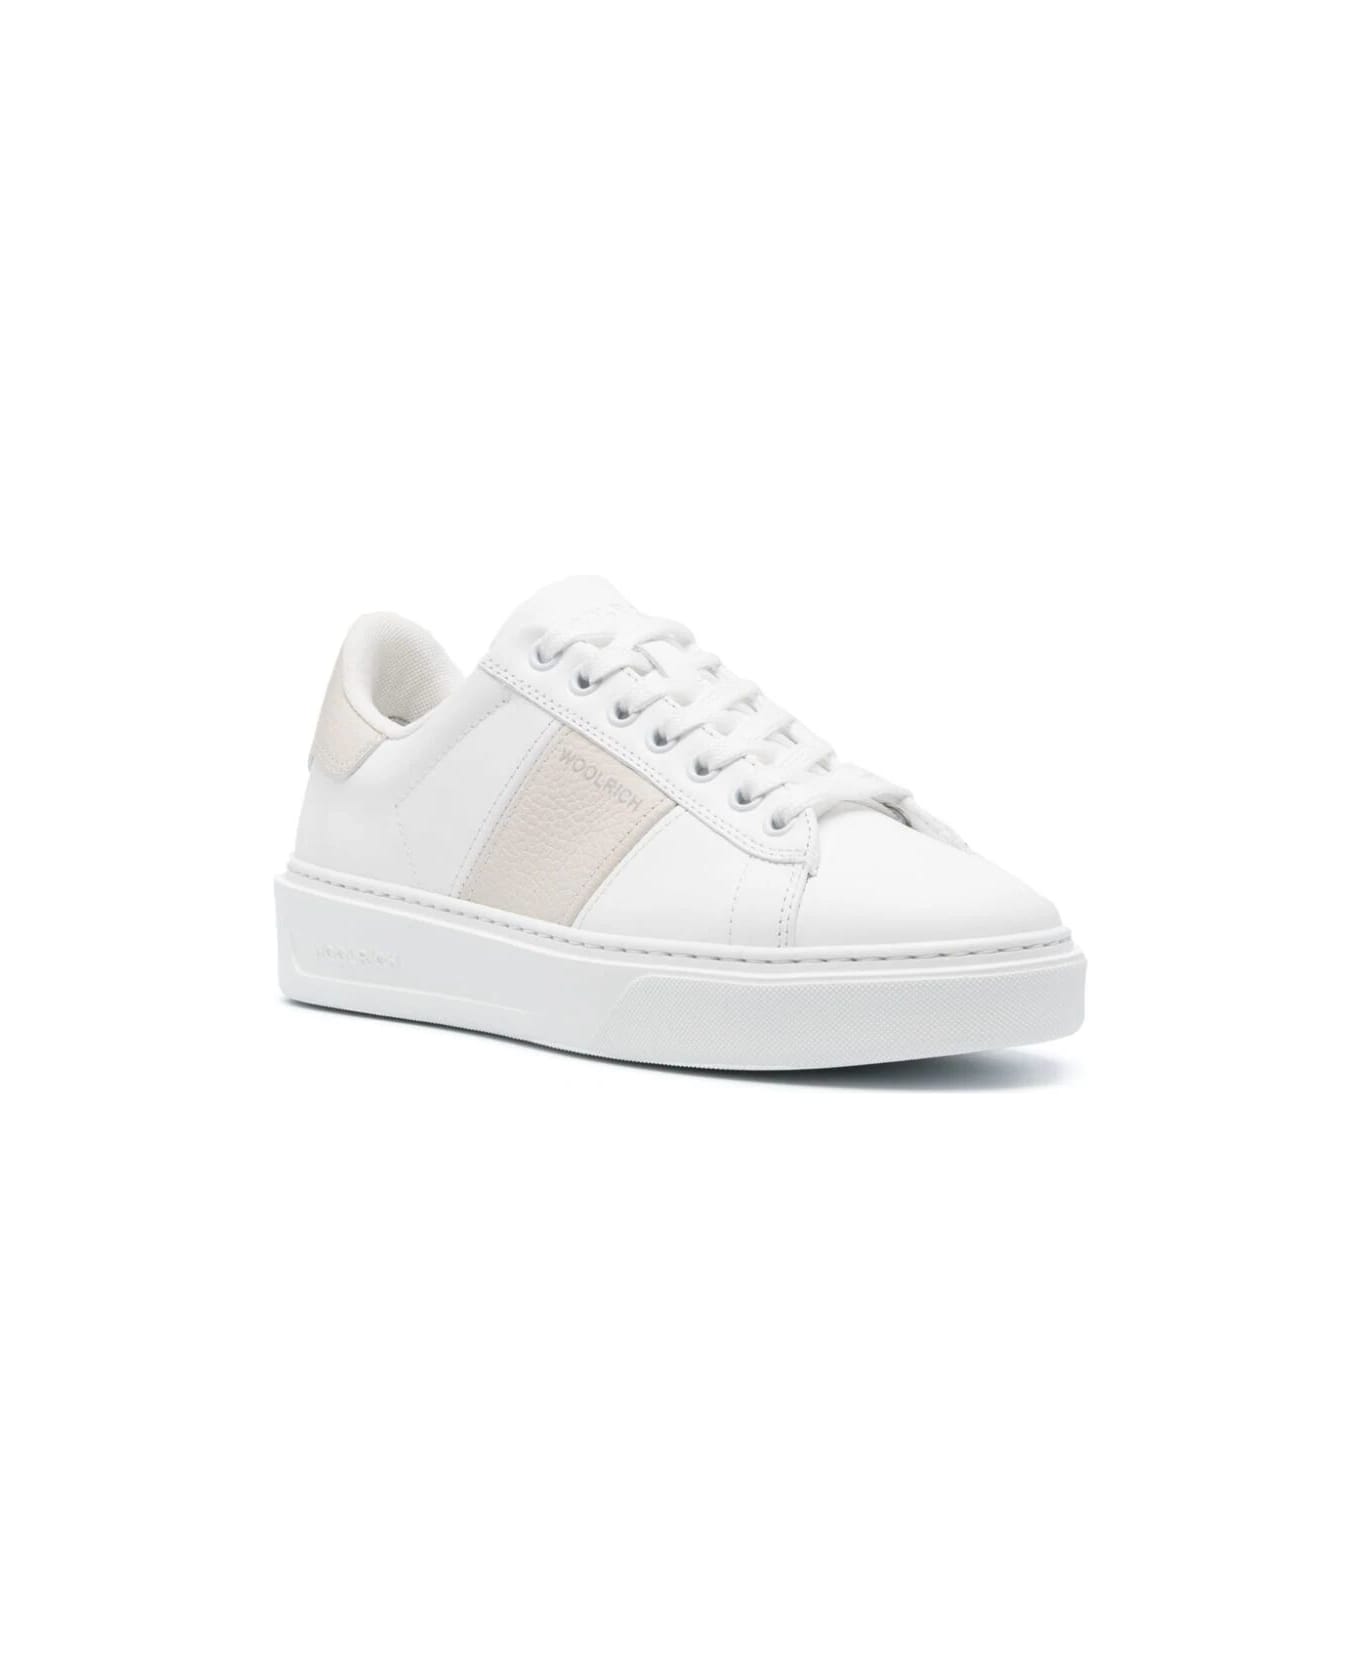 Woolrich Classic Court Sneakers - White Cream